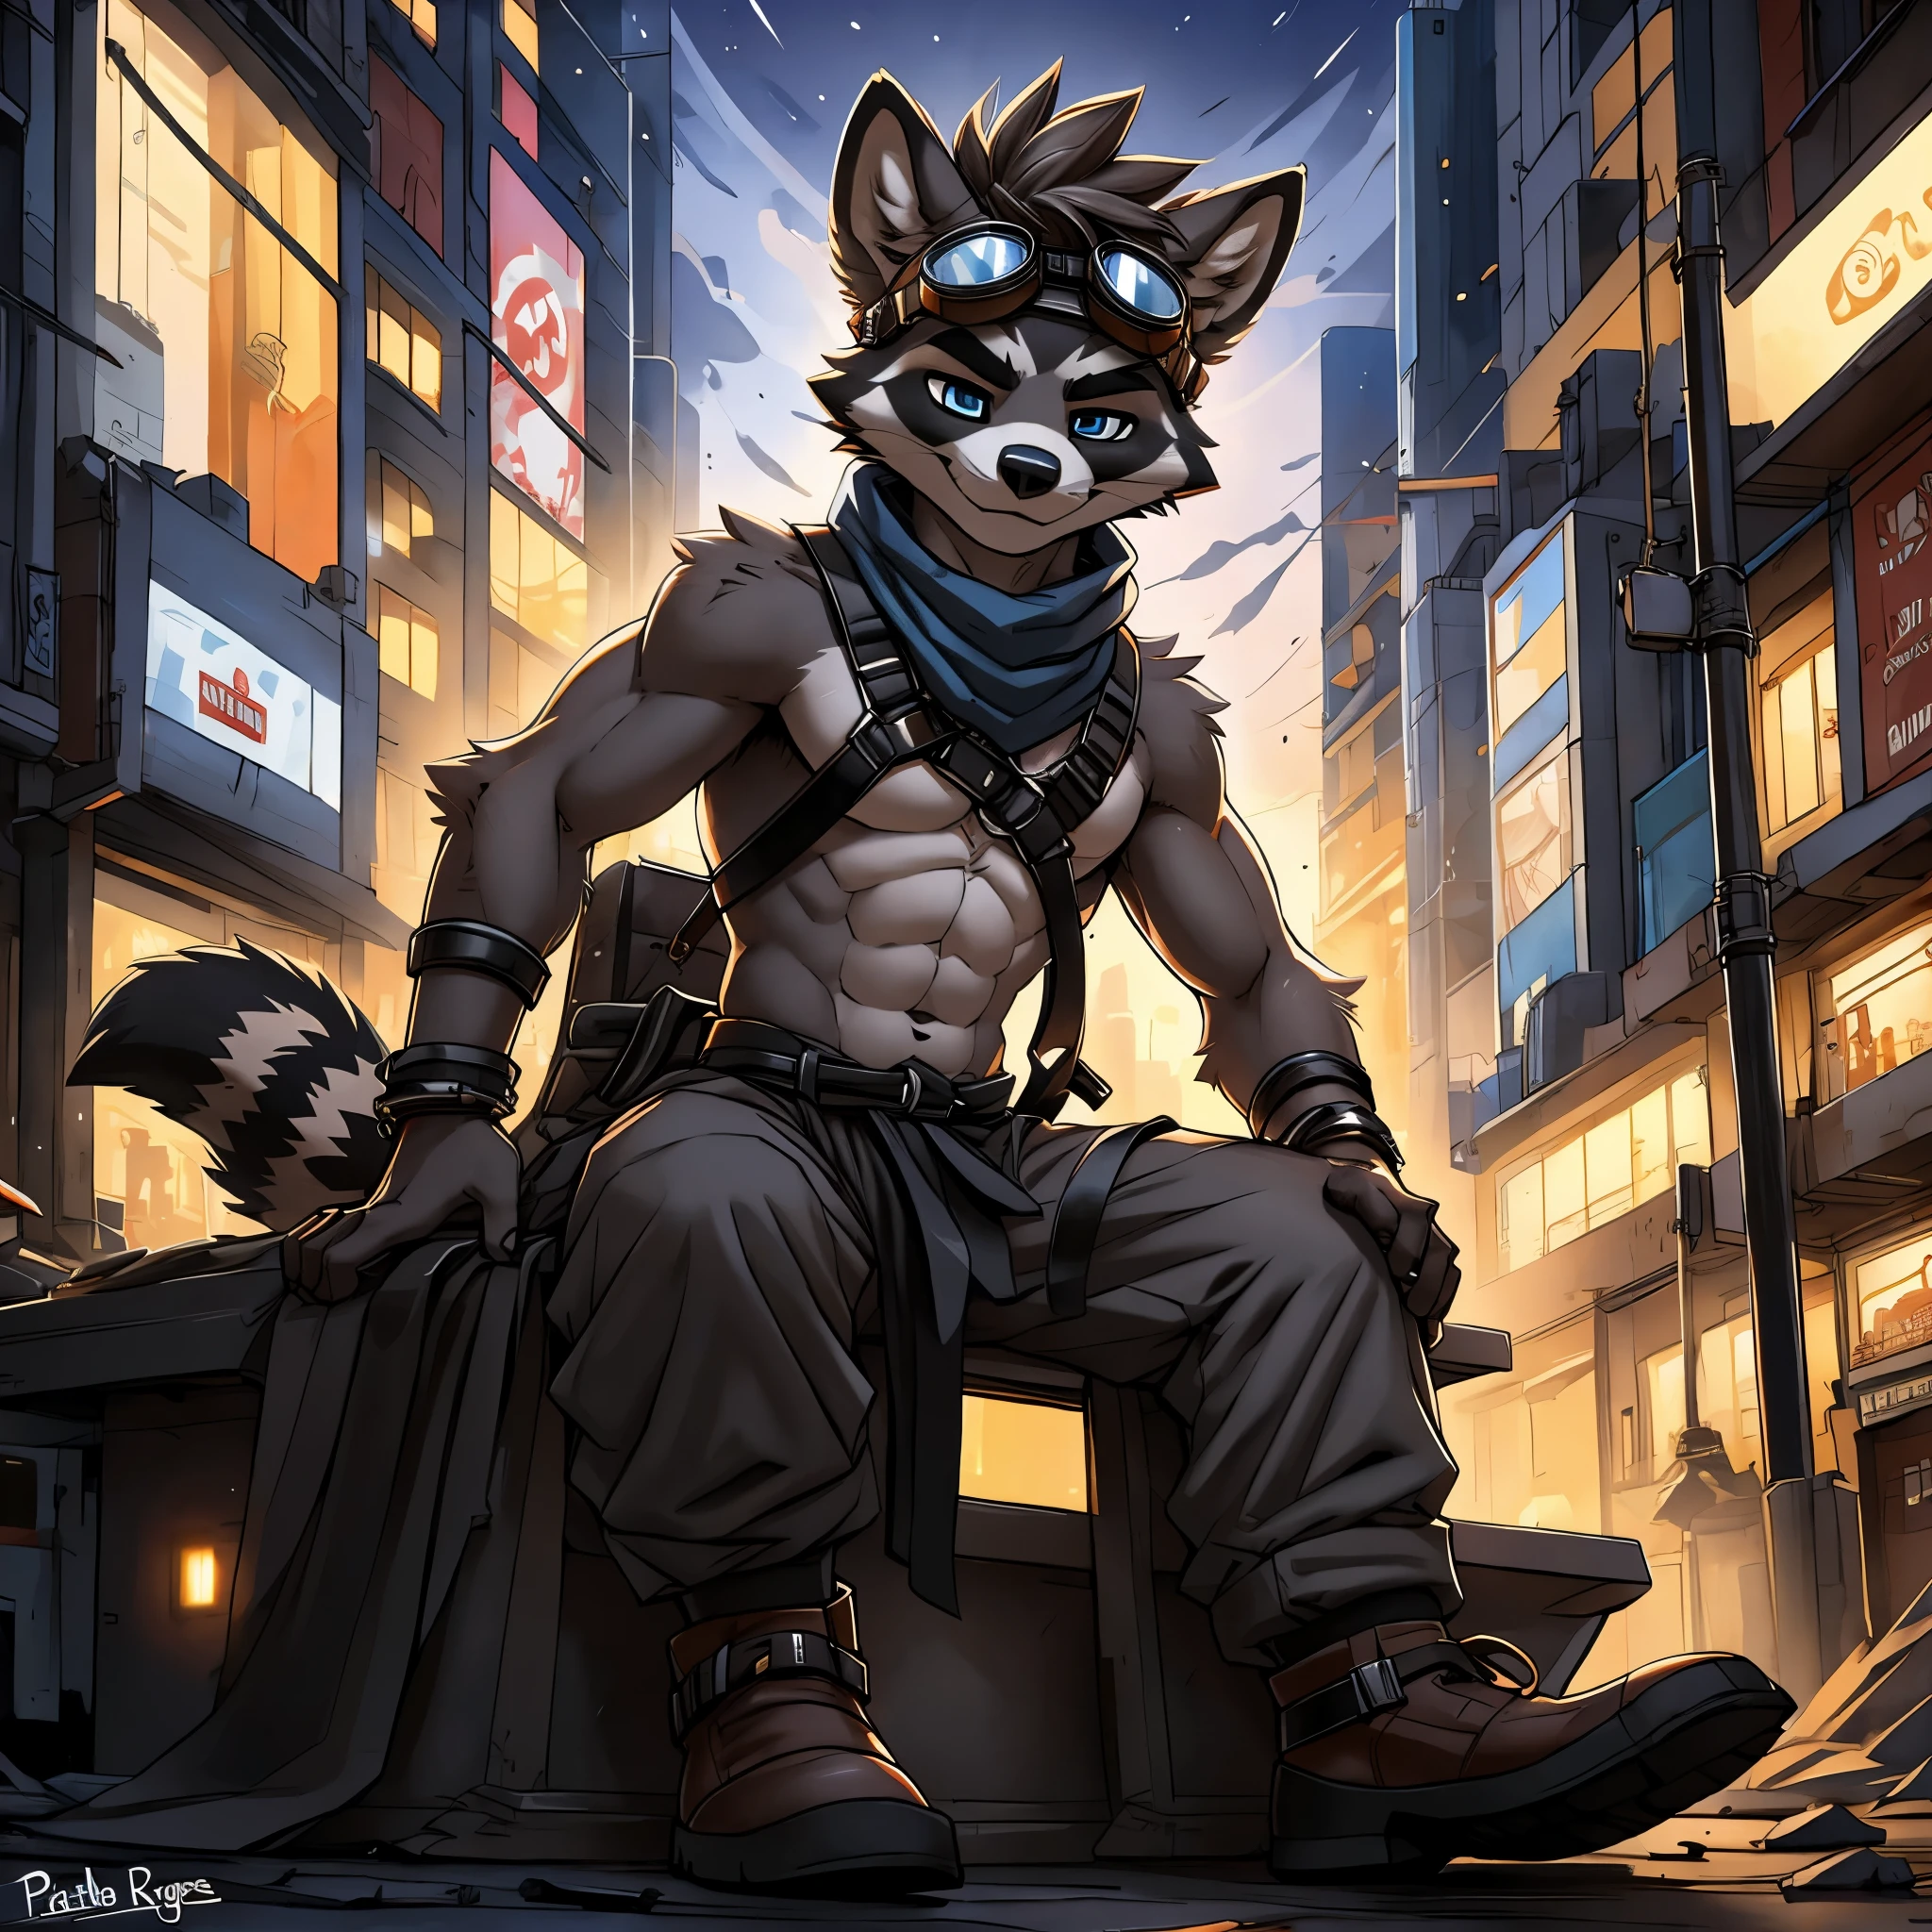 no lighting, deep shadow, dynamic angle, Solo, teen furry, furry, teen, raccoon, grey body, long brown spiked_ponytail, Detailed body fur, long blue scarf, leather_harness, black_loincloth, goggles, masterpiece, gray body, Detailed face, big eyebrows, blue eyes, detailed eyes, No muscles, Detailed hands, Flat body, Skinny, Detailed paws, metal cuffs on wrists, metal cuffs on ankles, black baggy pants, no shirt, crowded city, night, no underwear, sitting, art by pache_riggs